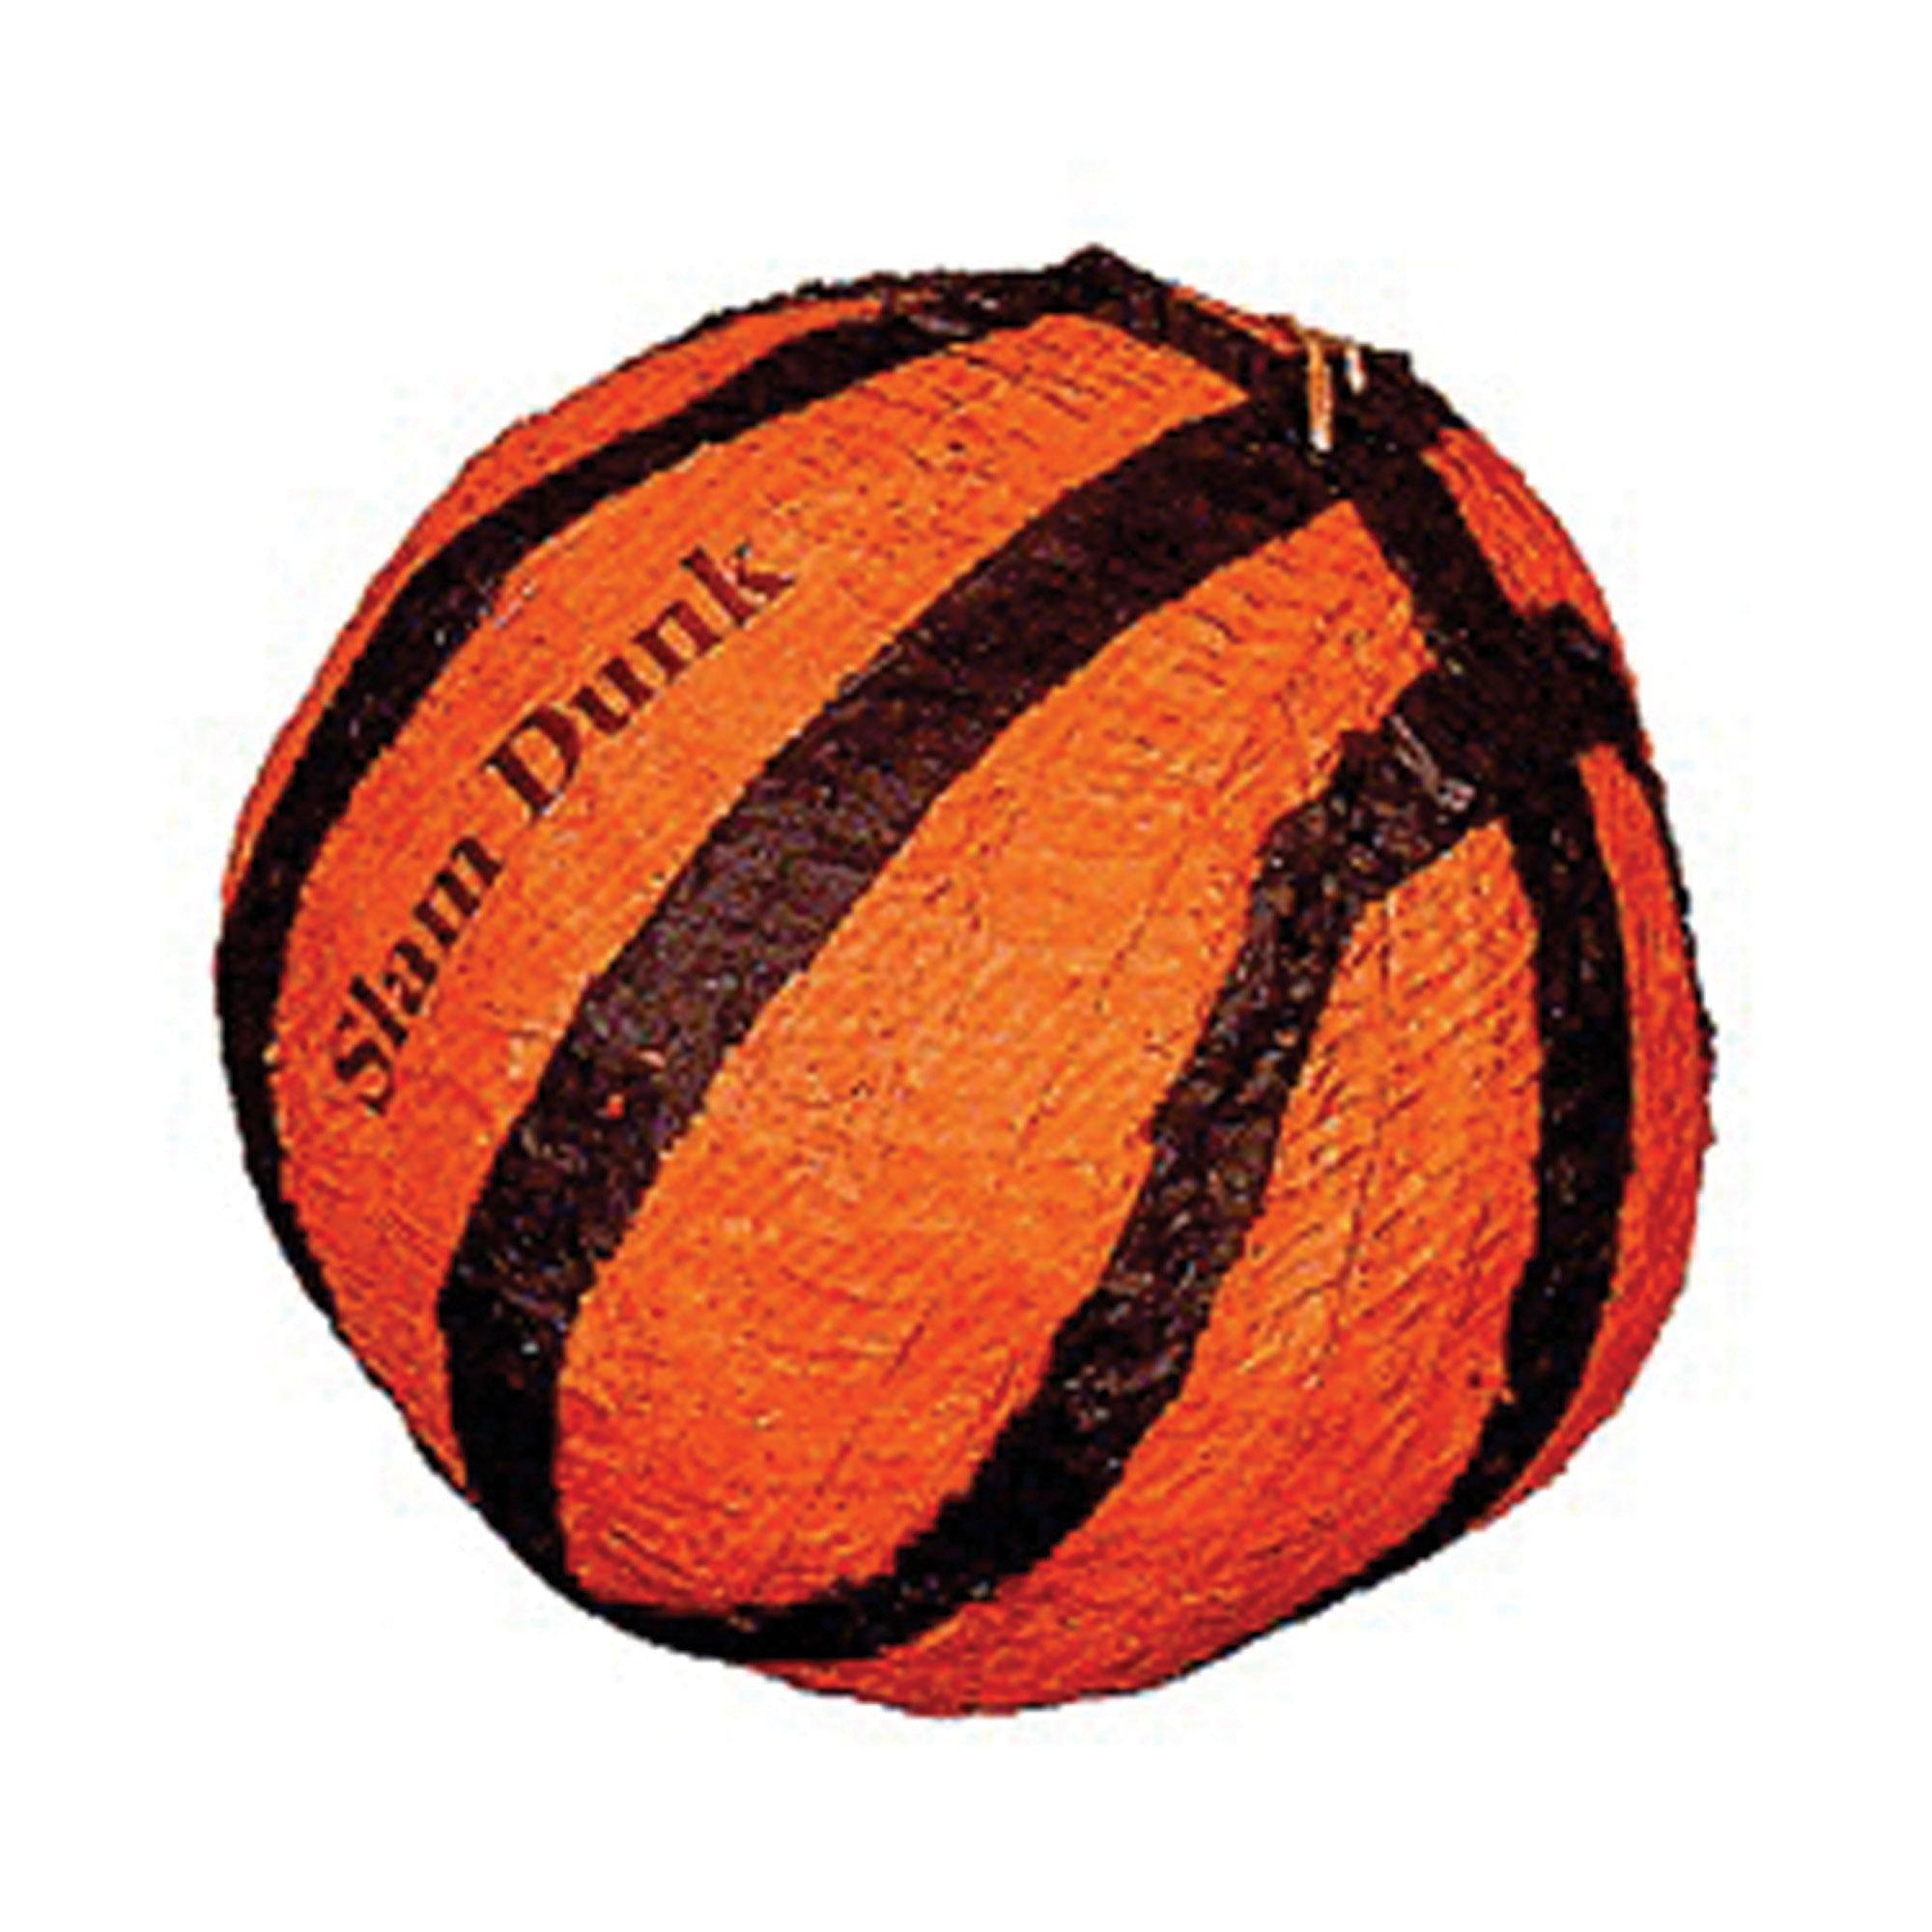 Basketball Pinata 10 1/2in x 10 1/2in x 10 1/2in | Party City